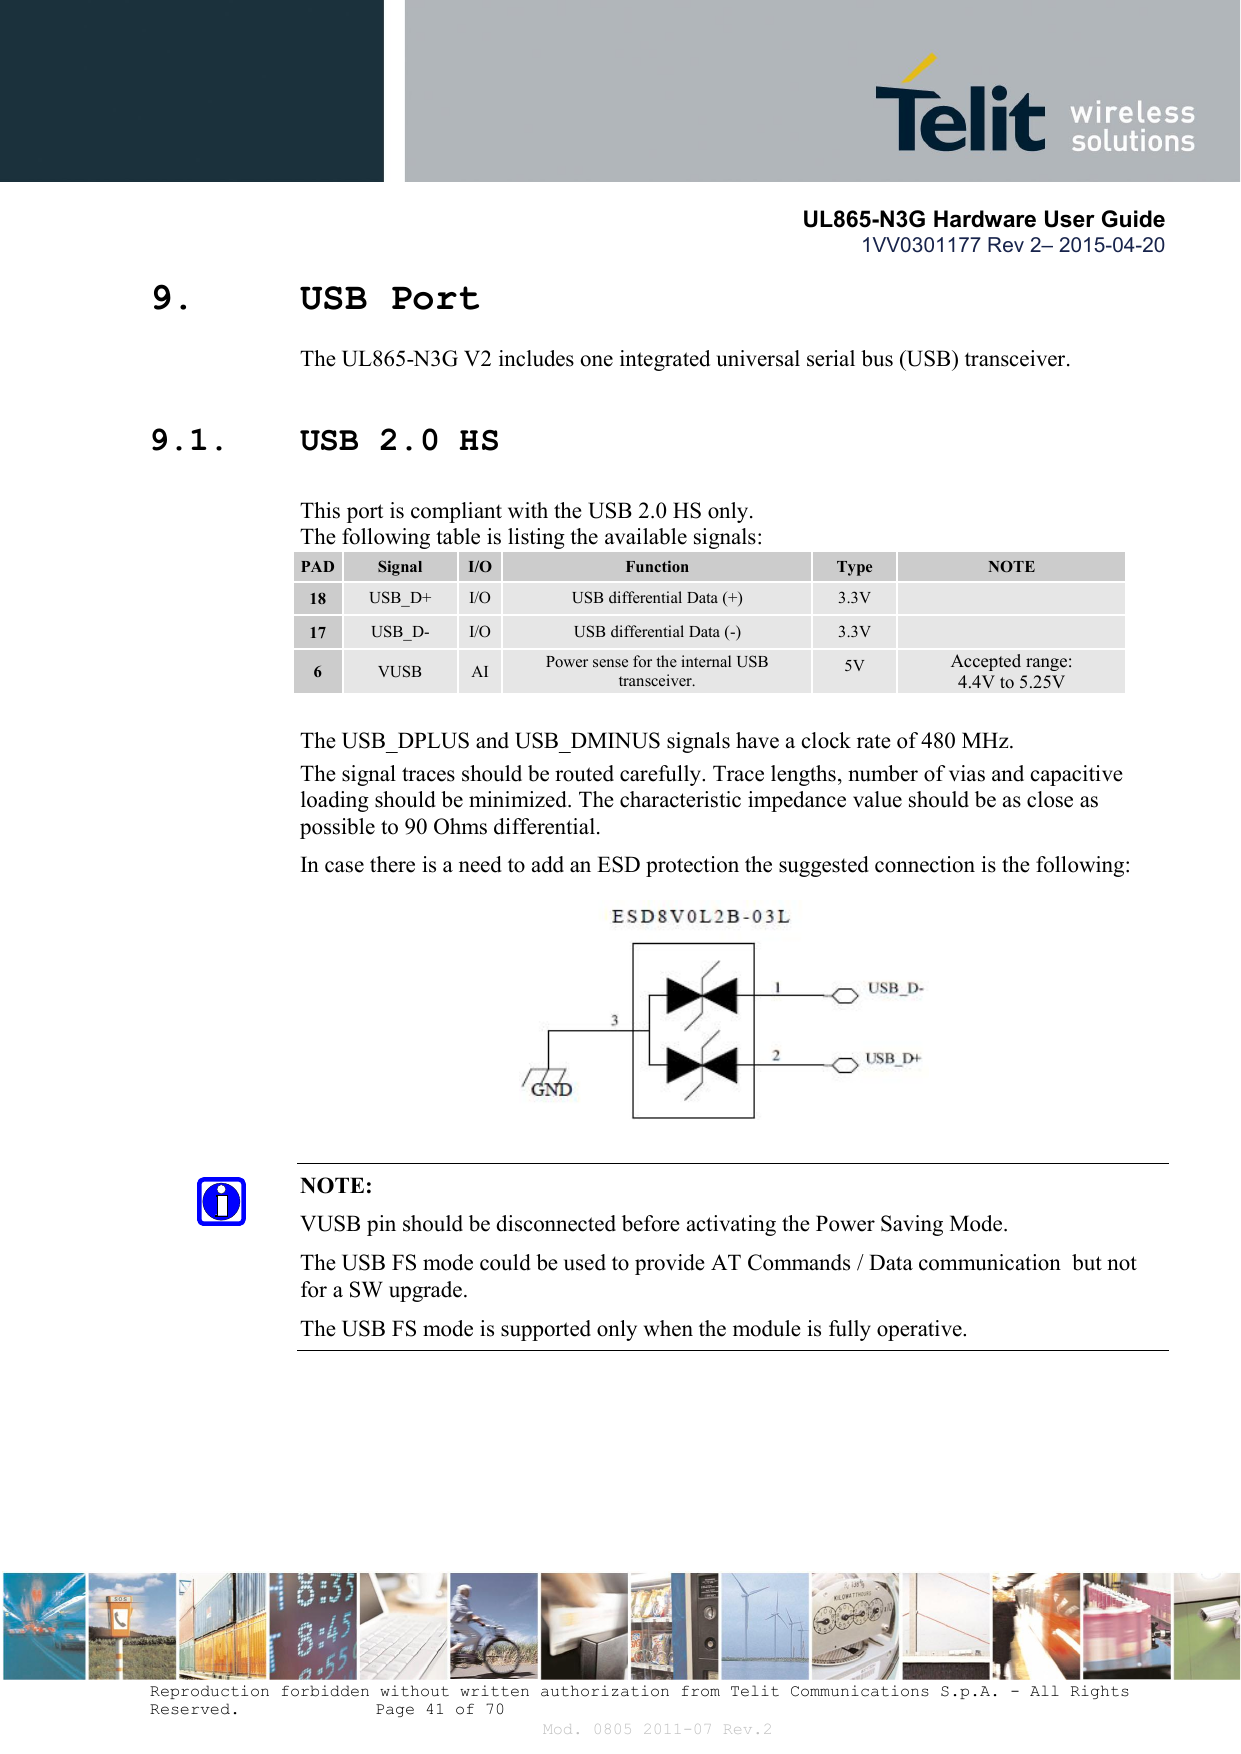       UL865-N3G Hardware User Guide 1VV0301177 Rev 2– 2015-04-20  Reproduction forbidden without written authorization from Telit Communications S.p.A. - All Rights Reserved.    Page 41 of 70 Mod. 0805 2011-07 Rev.2 9. USB Port  The UL865-N3G V2 includes one integrated universal serial bus (USB) transceiver. 9.1. USB 2.0 HS    This port is compliant with the USB 2.0 HS only.   The following table is listing the available signals: PAD Signal  I/O  Function  Type  NOTE 18  USB_D+  I/O  USB differential Data (+)  3.3V   17  USB_D-  I/O  USB differential Data (-)  3.3V   6  VUSB  AI  Power sense for the internal USB transceiver.  5V  Accepted range:  4.4V to 5.25V      The USB_DPLUS and USB_DMINUS signals have a clock rate of 480 MHz.  The signal traces should be routed carefully. Trace lengths, number of vias and capacitive loading should be minimized. The characteristic impedance value should be as close as possible to 90 Ohms differential. In case there is a need to add an ESD protection the suggested connection is the following:        NOTE: VUSB pin should be disconnected before activating the Power Saving Mode. The USB FS mode could be used to provide AT Commands / Data communication  but not for a SW upgrade. The USB FS mode is supported only when the module is fully operative.         